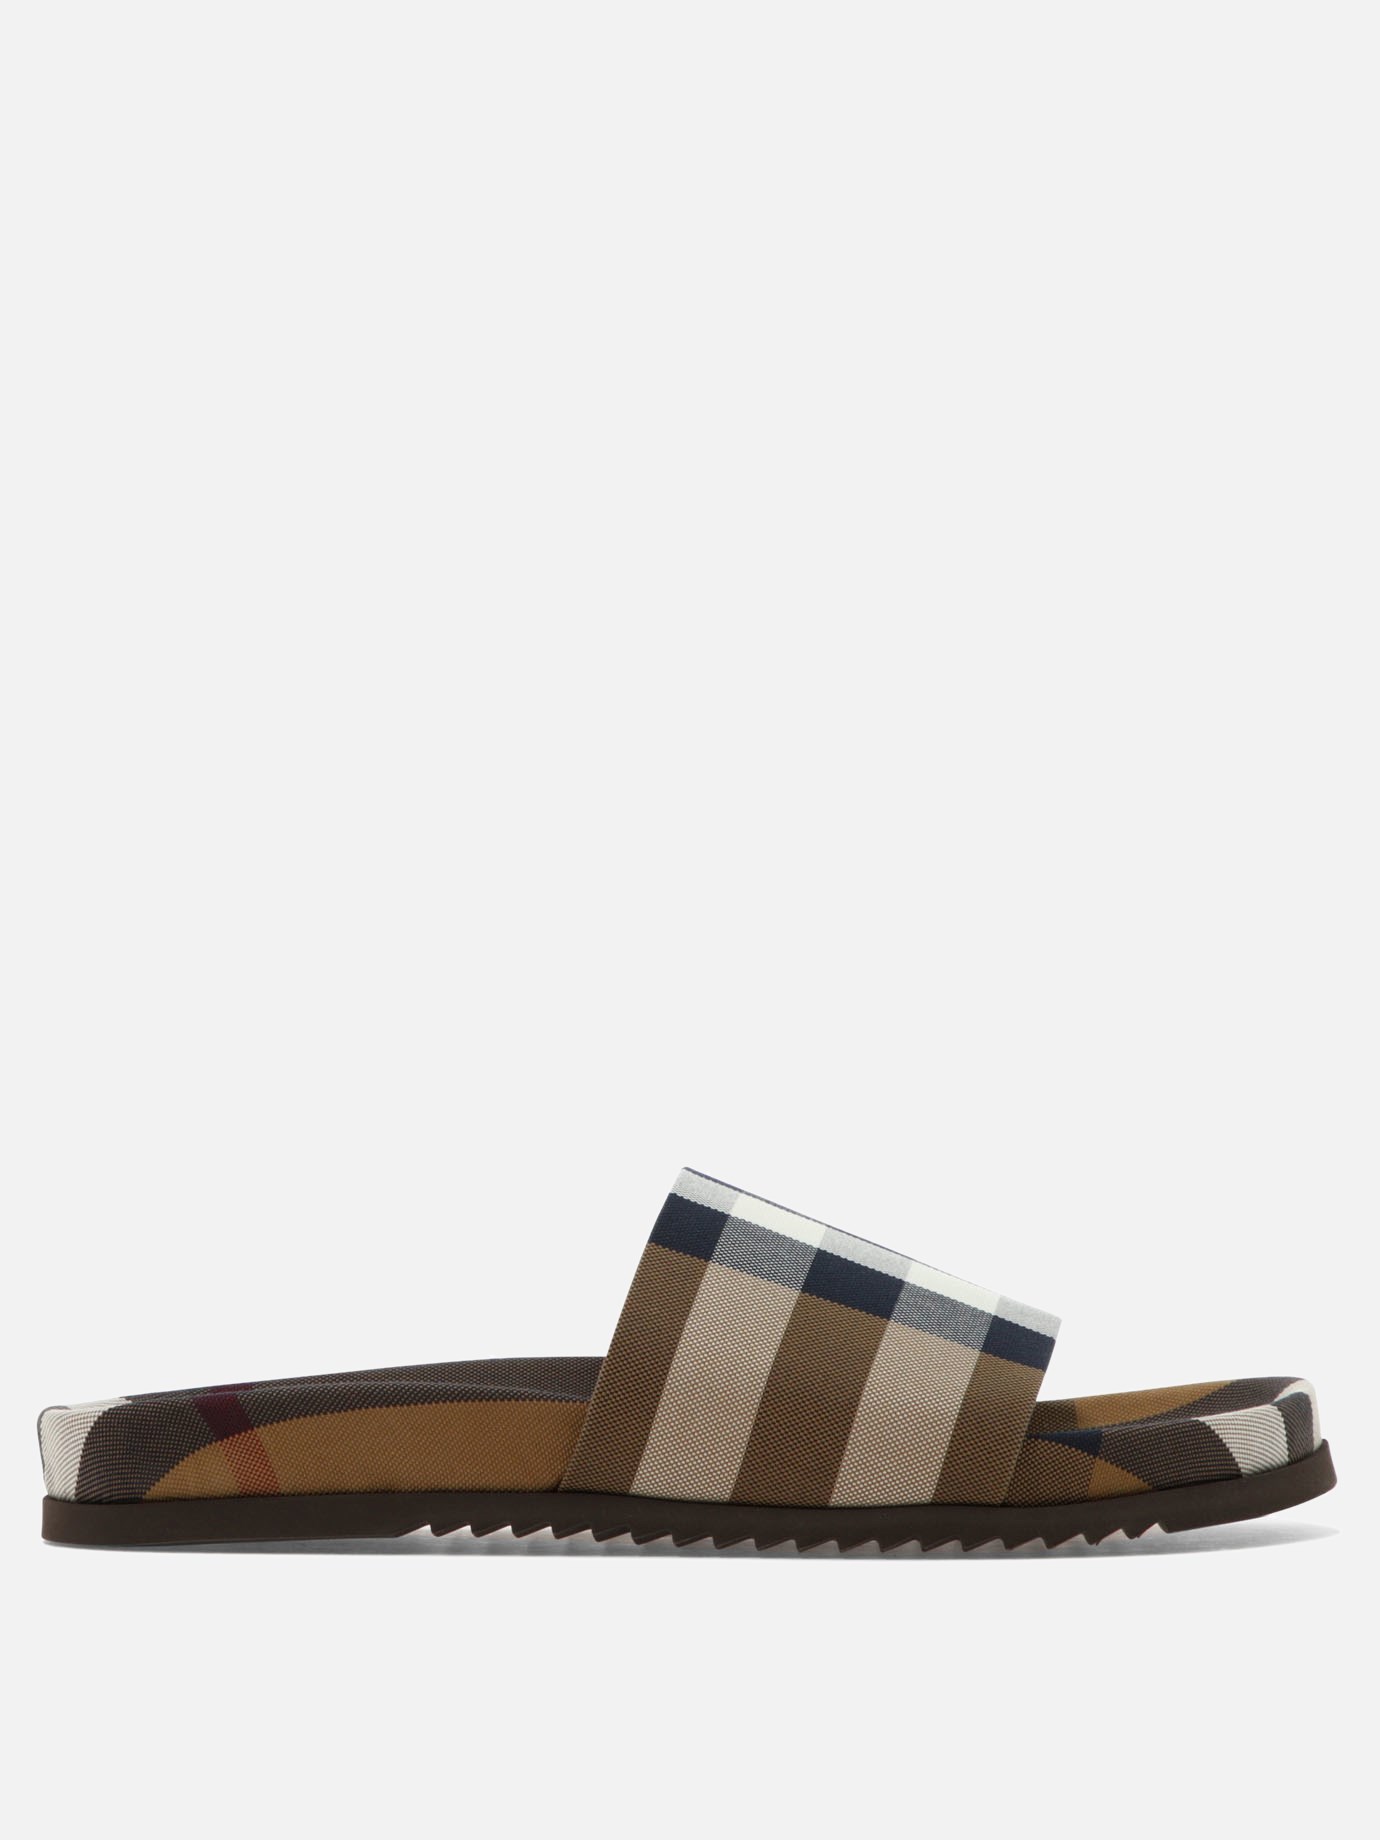  Melroy  sandalsby Burberry - 1